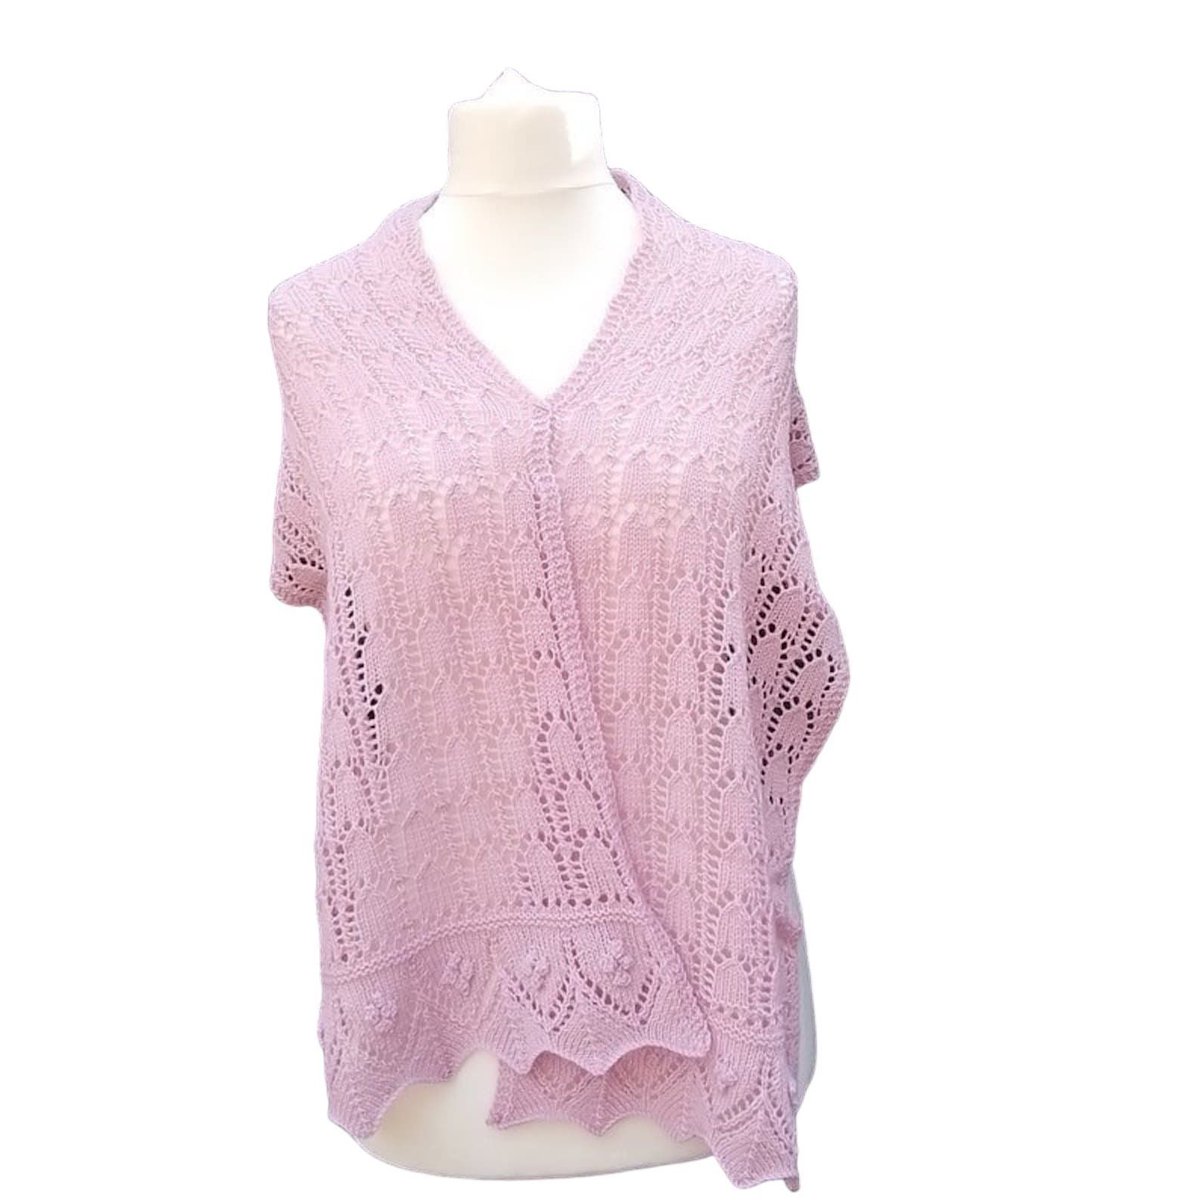 Check out this beautiful hand-knitted lacy shawl in light pink alpaca and wool mixed yarn! It's perfect for adding a touch of elegance to any outfit. Get yours today from #Knittingtopia on #Etsy knittingtopia.etsy.com/listing/167996… #knittedshawl #ladiesshawl #handmade #craftbizparty #MHHSBD